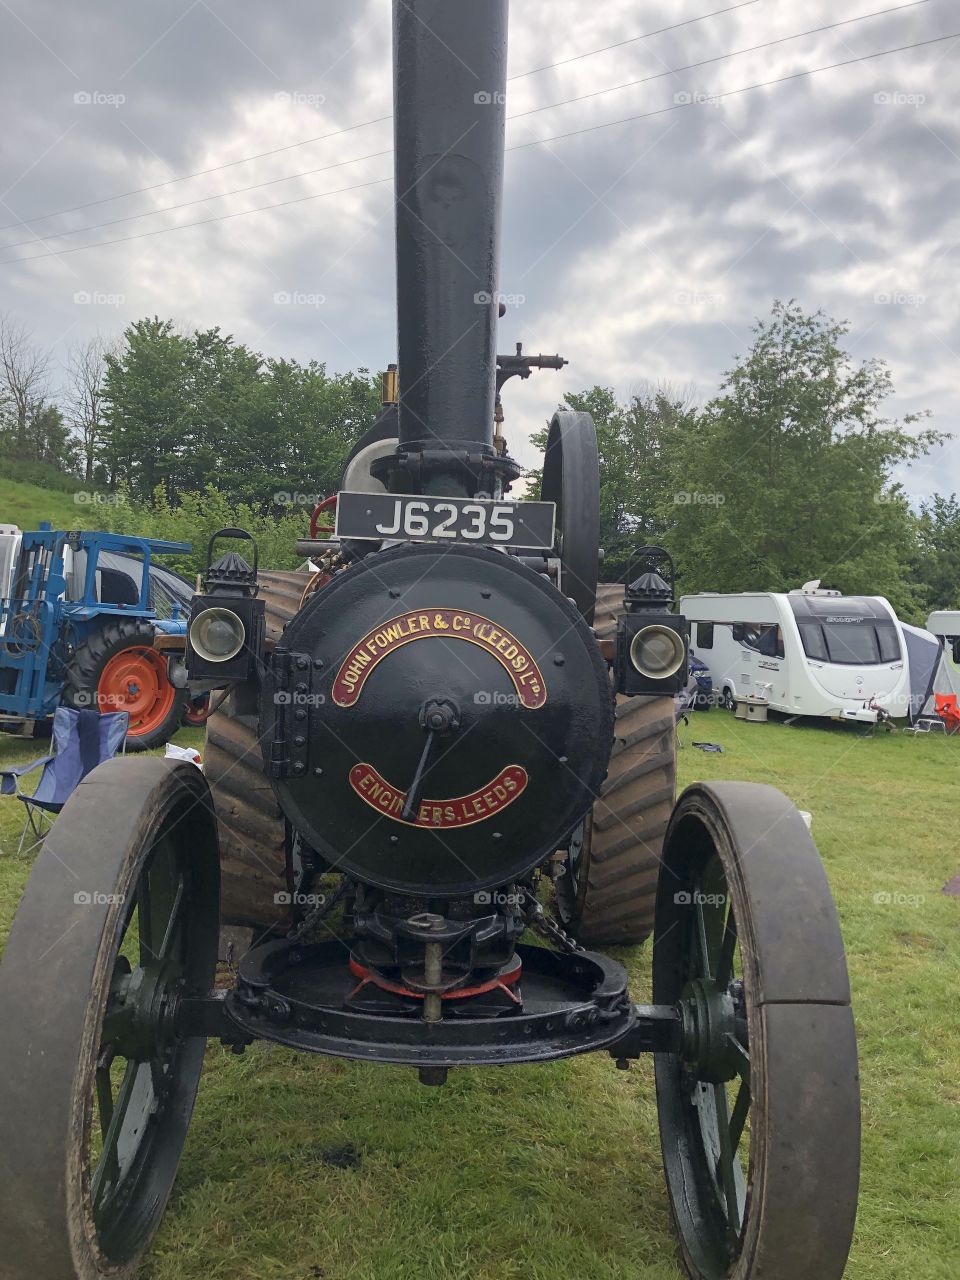 A final steam engine from Yorkshire